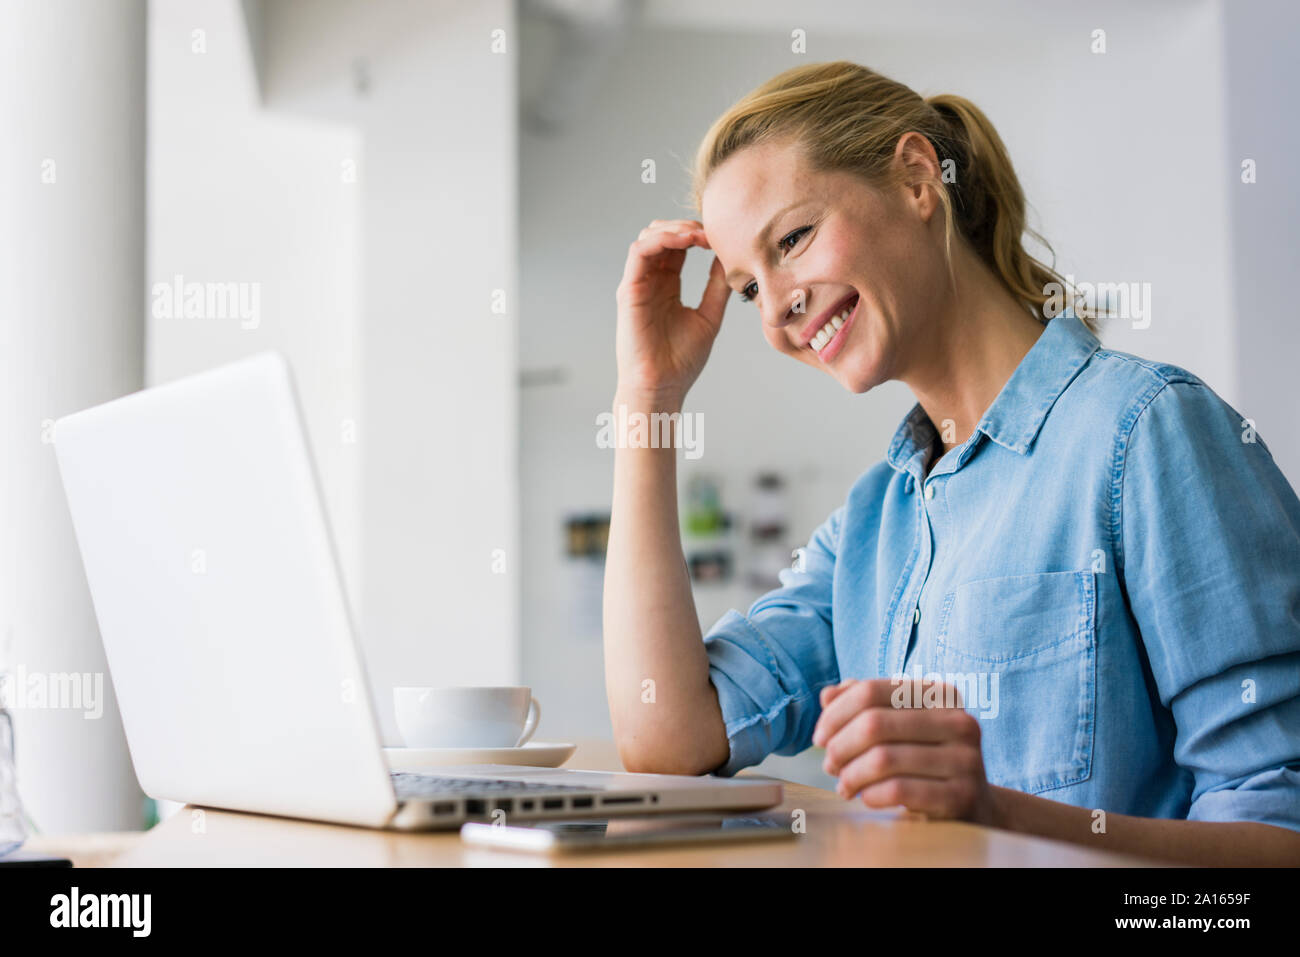 Woman in coffee shop, using laptop Banque D'Images